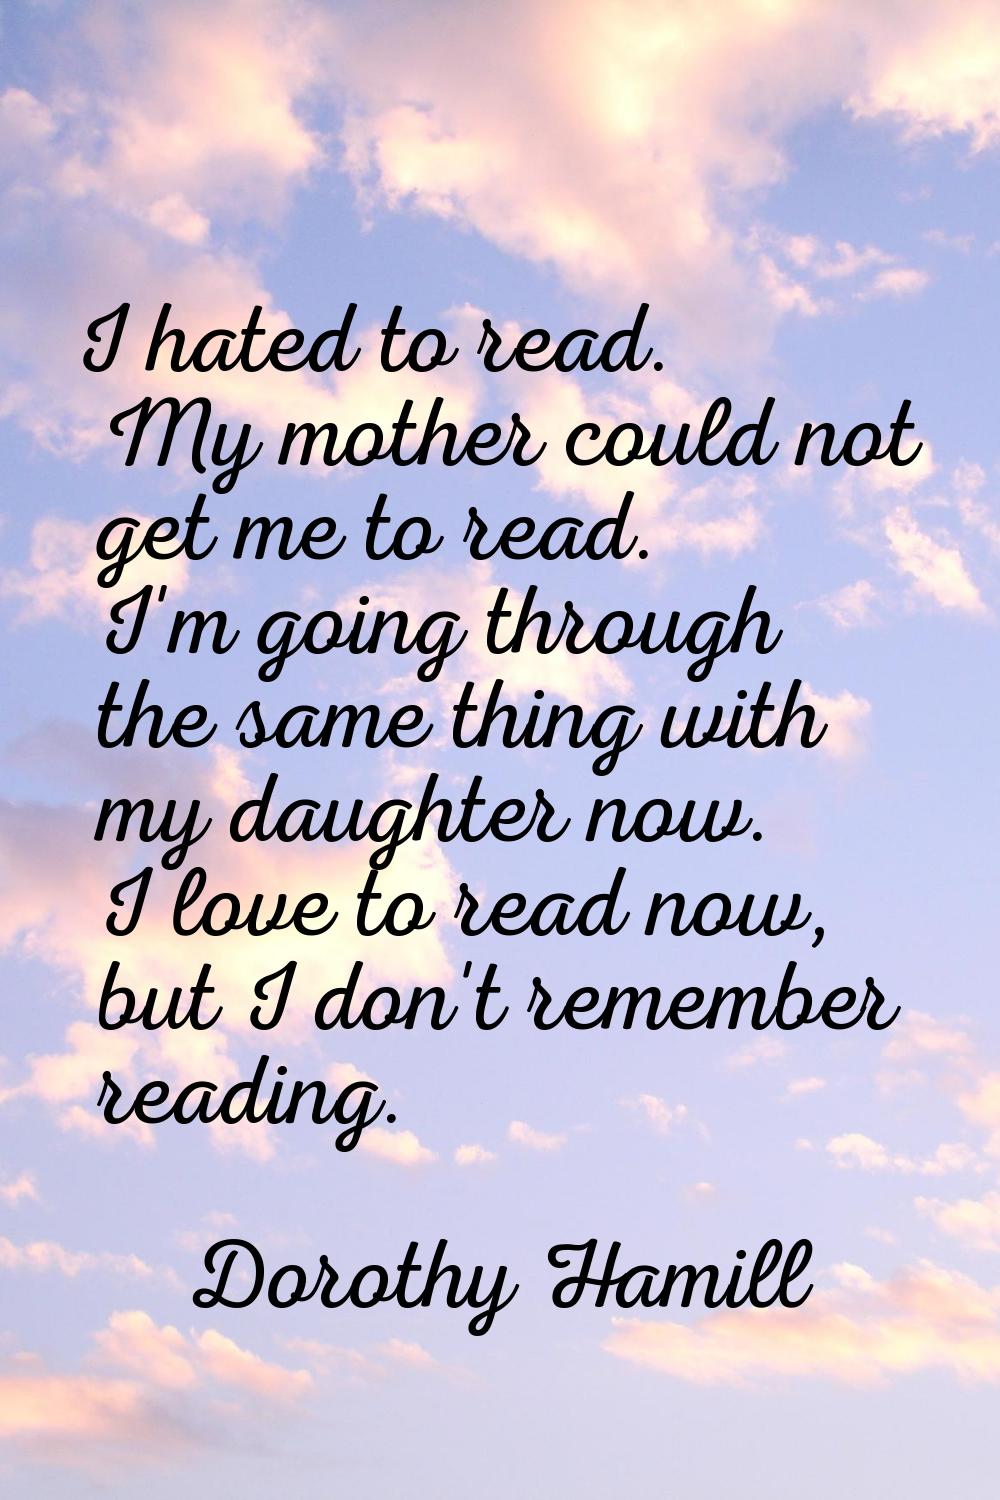 I hated to read. My mother could not get me to read. I'm going through the same thing with my daugh